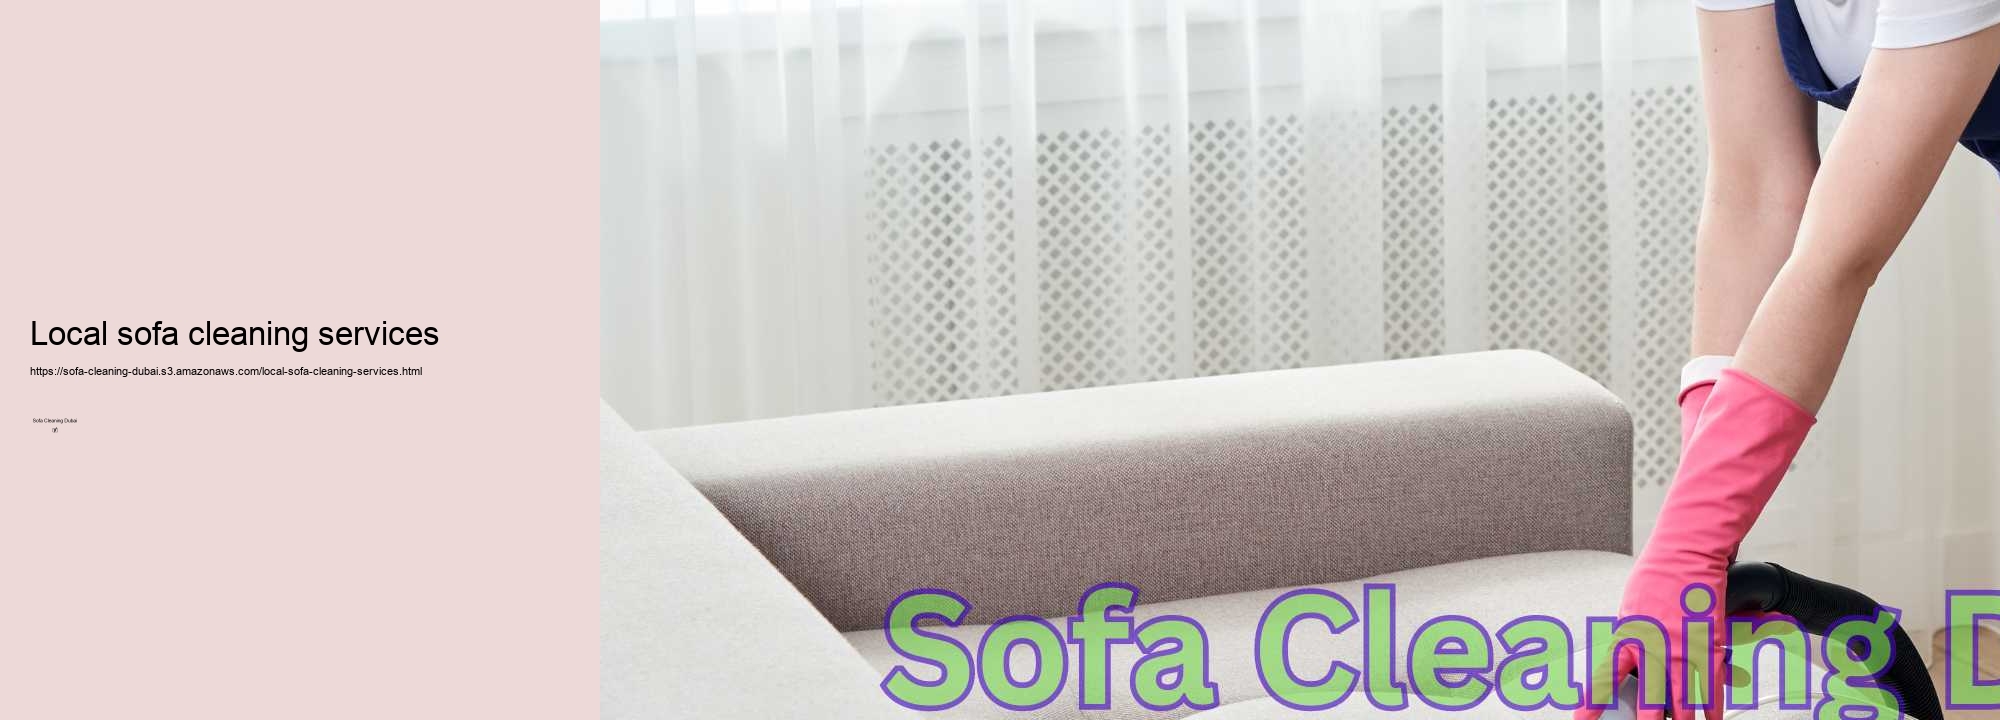 Local sofa cleaning services